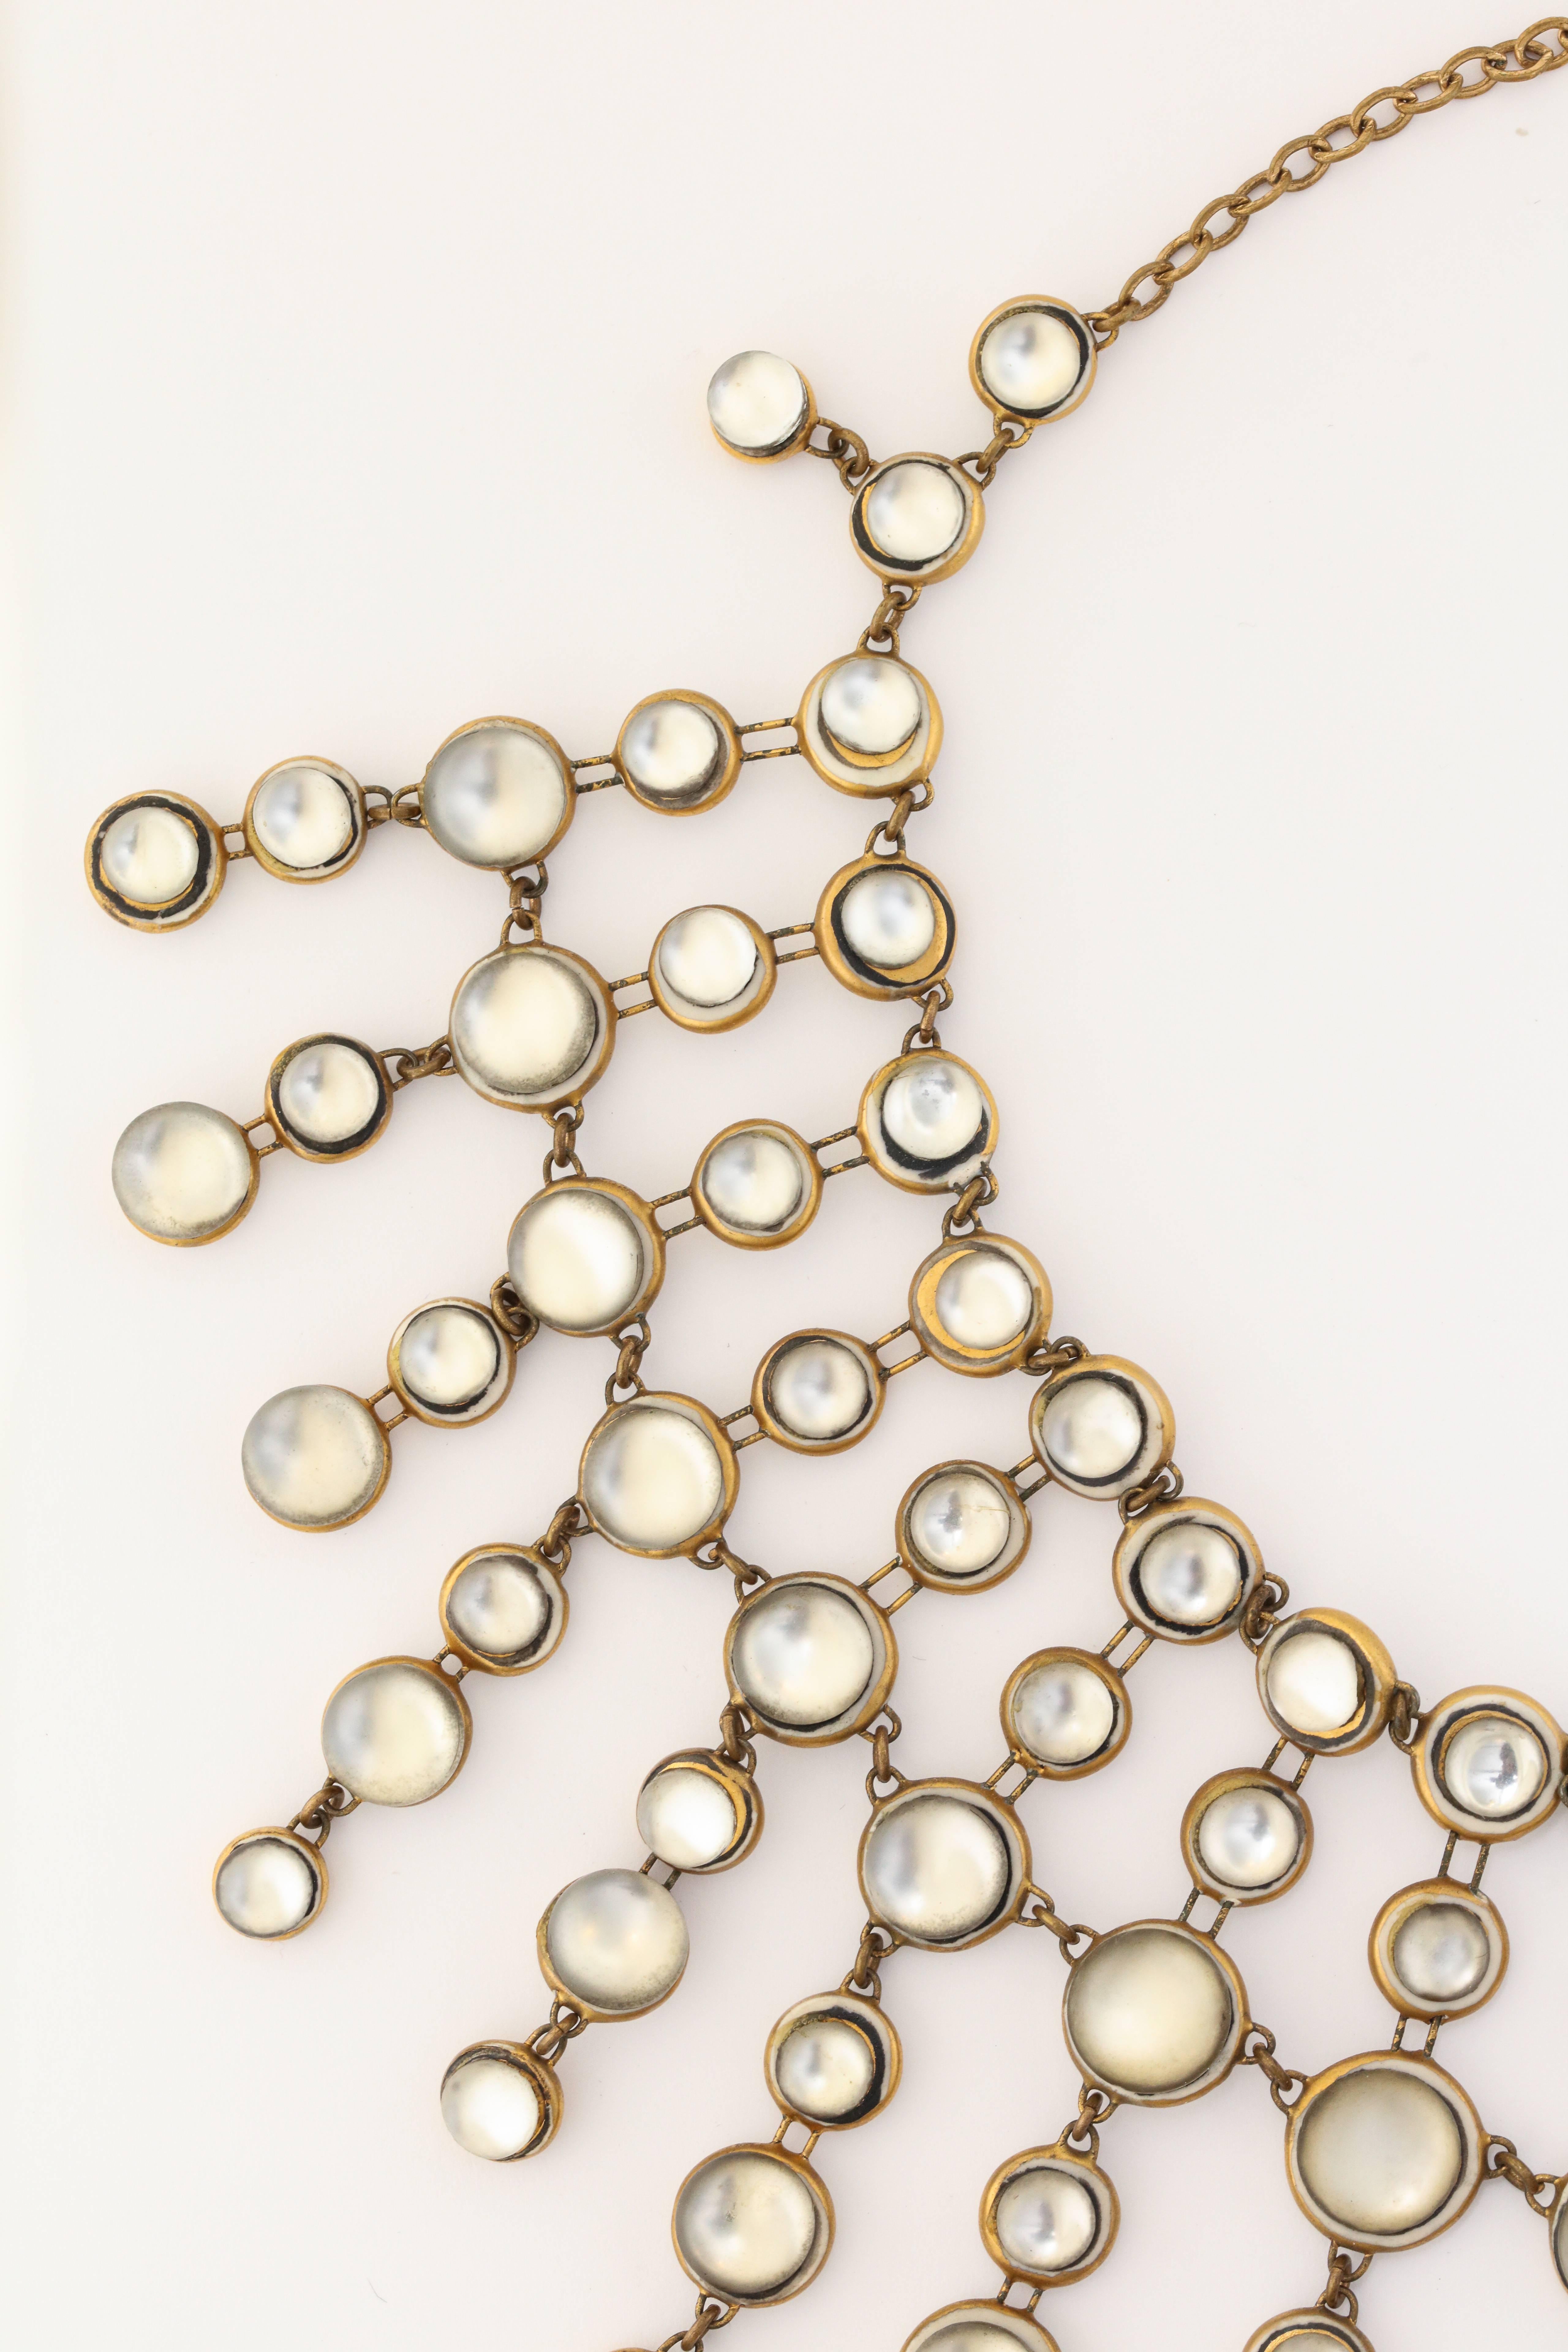 A stunning necklace row by Denise Gatard of glass 'moonstones' backed by ceramic in her signature design 